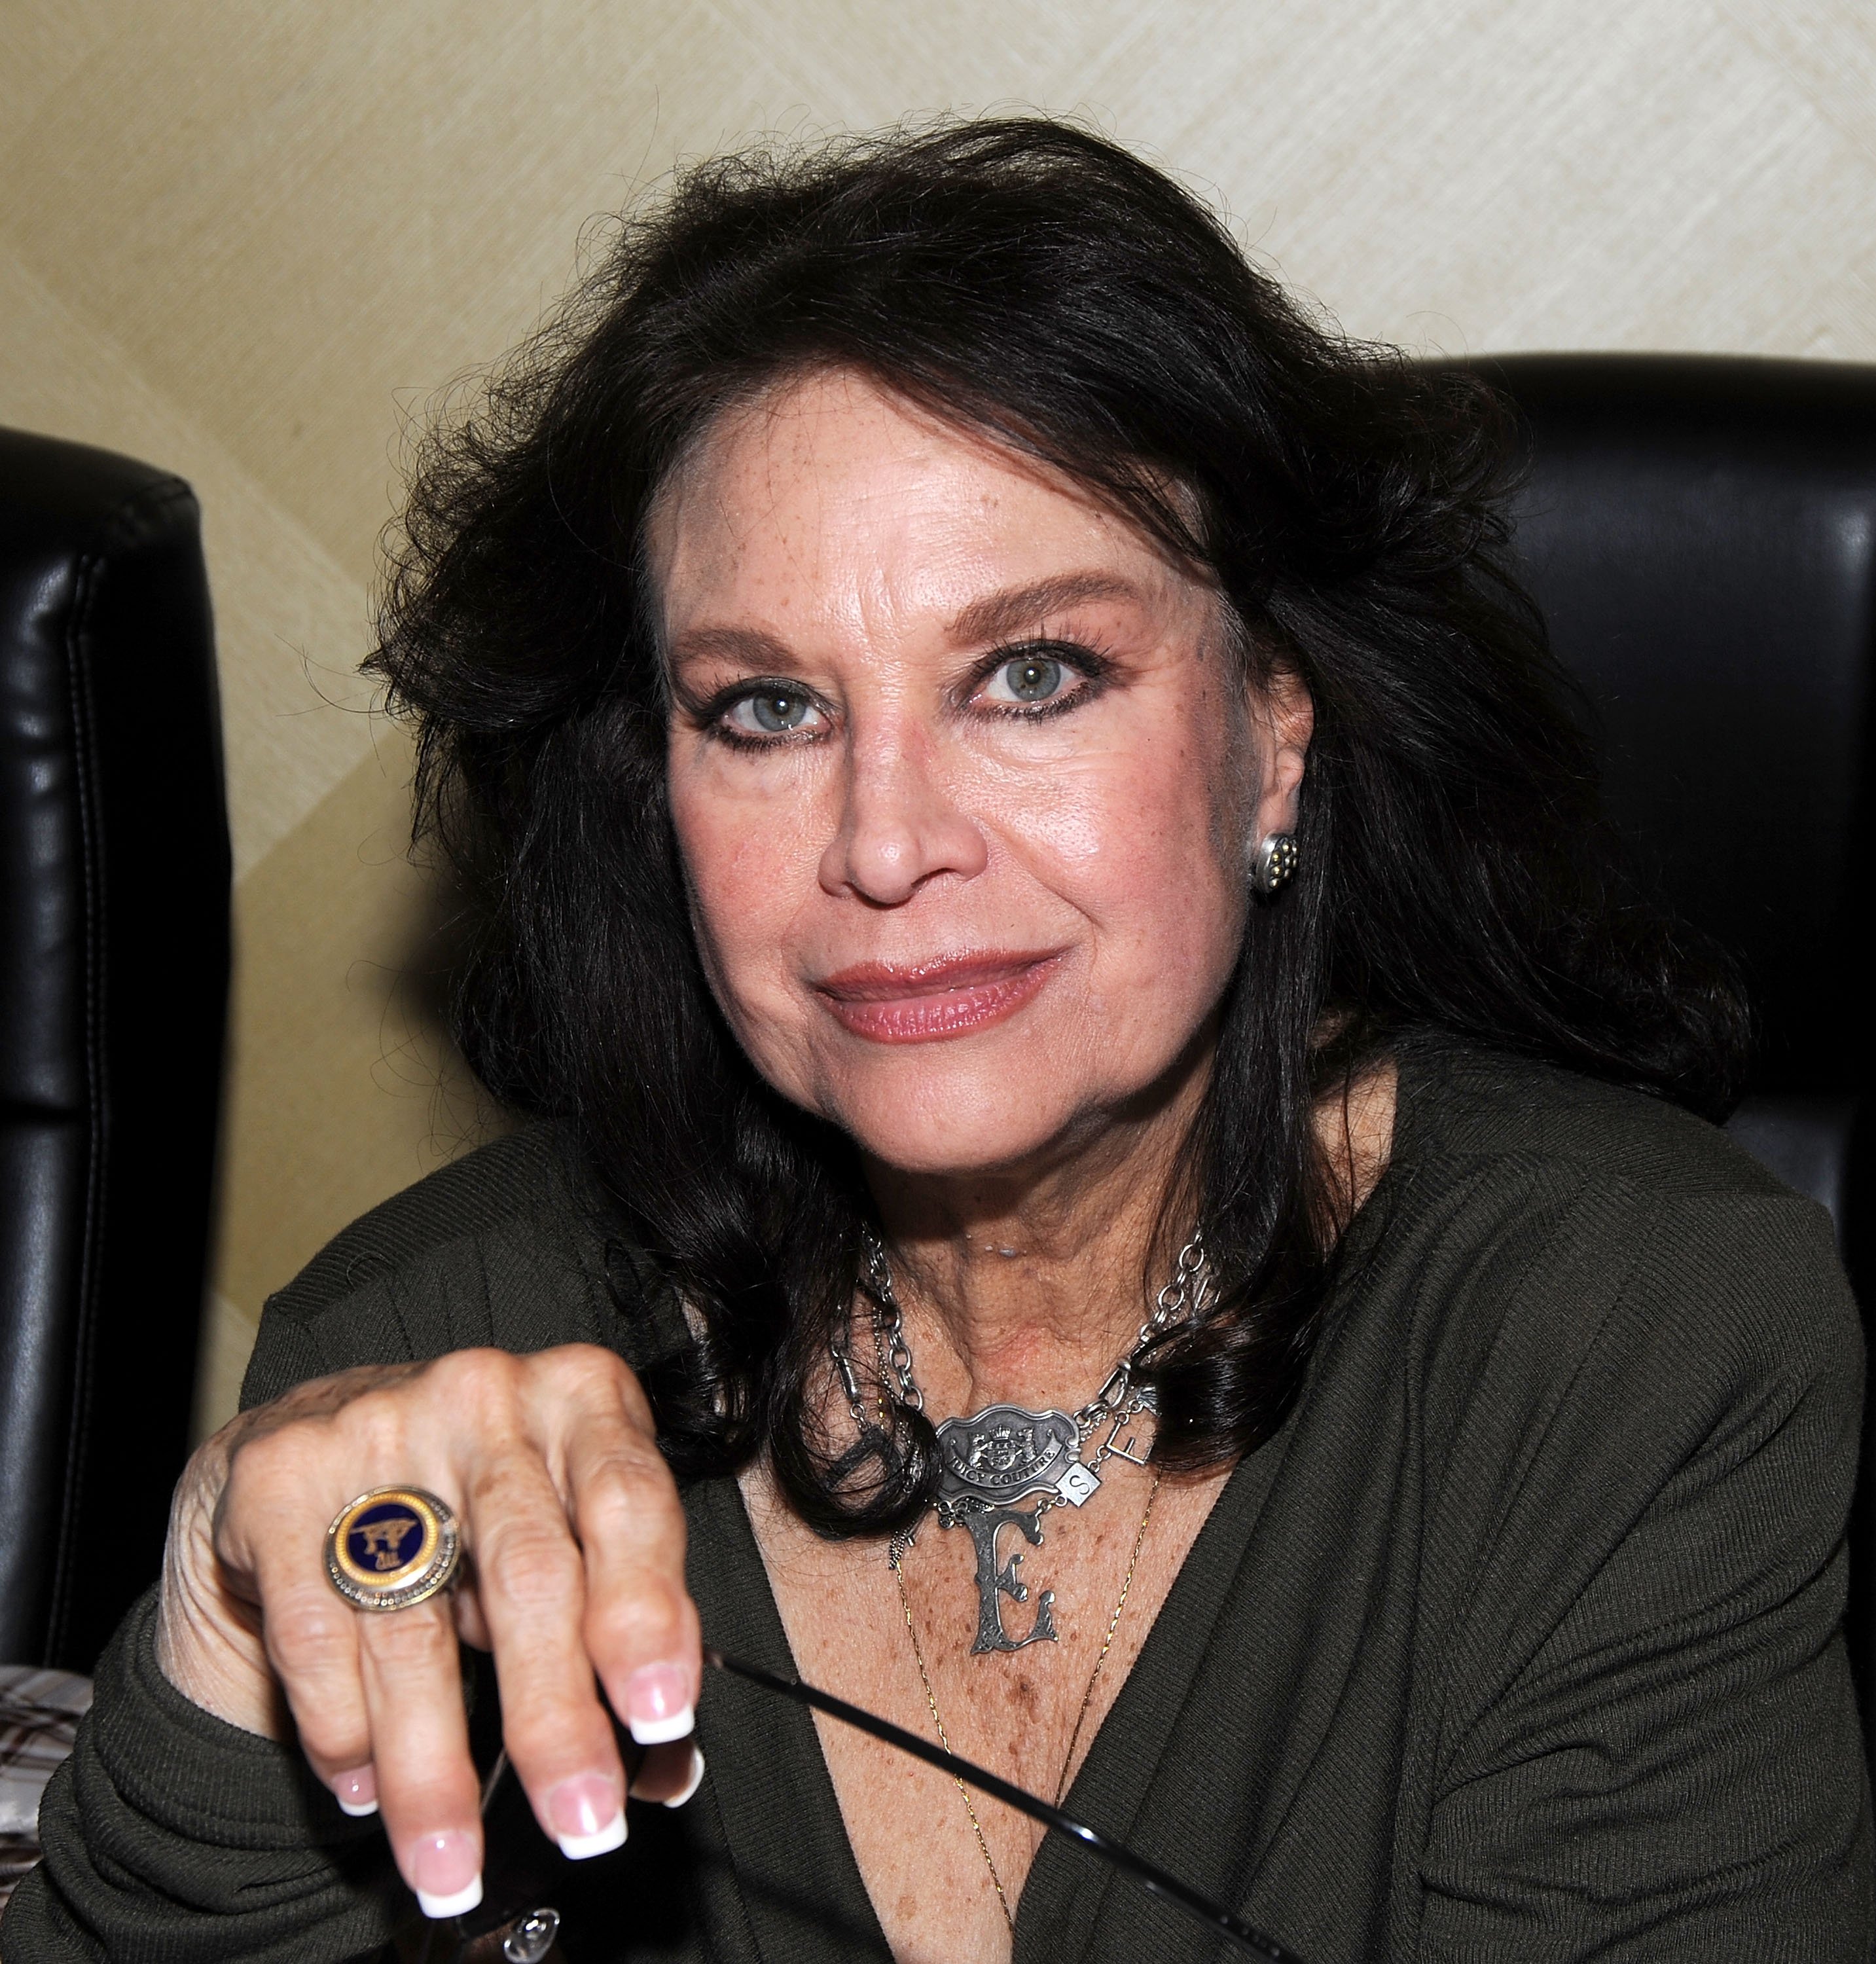 Lana Wood attends the 2011 Chiller Theatre Expo at the Hilton Parsippany on October 29, 2011 in Parsippany, New Jersey | Source: Getty Images